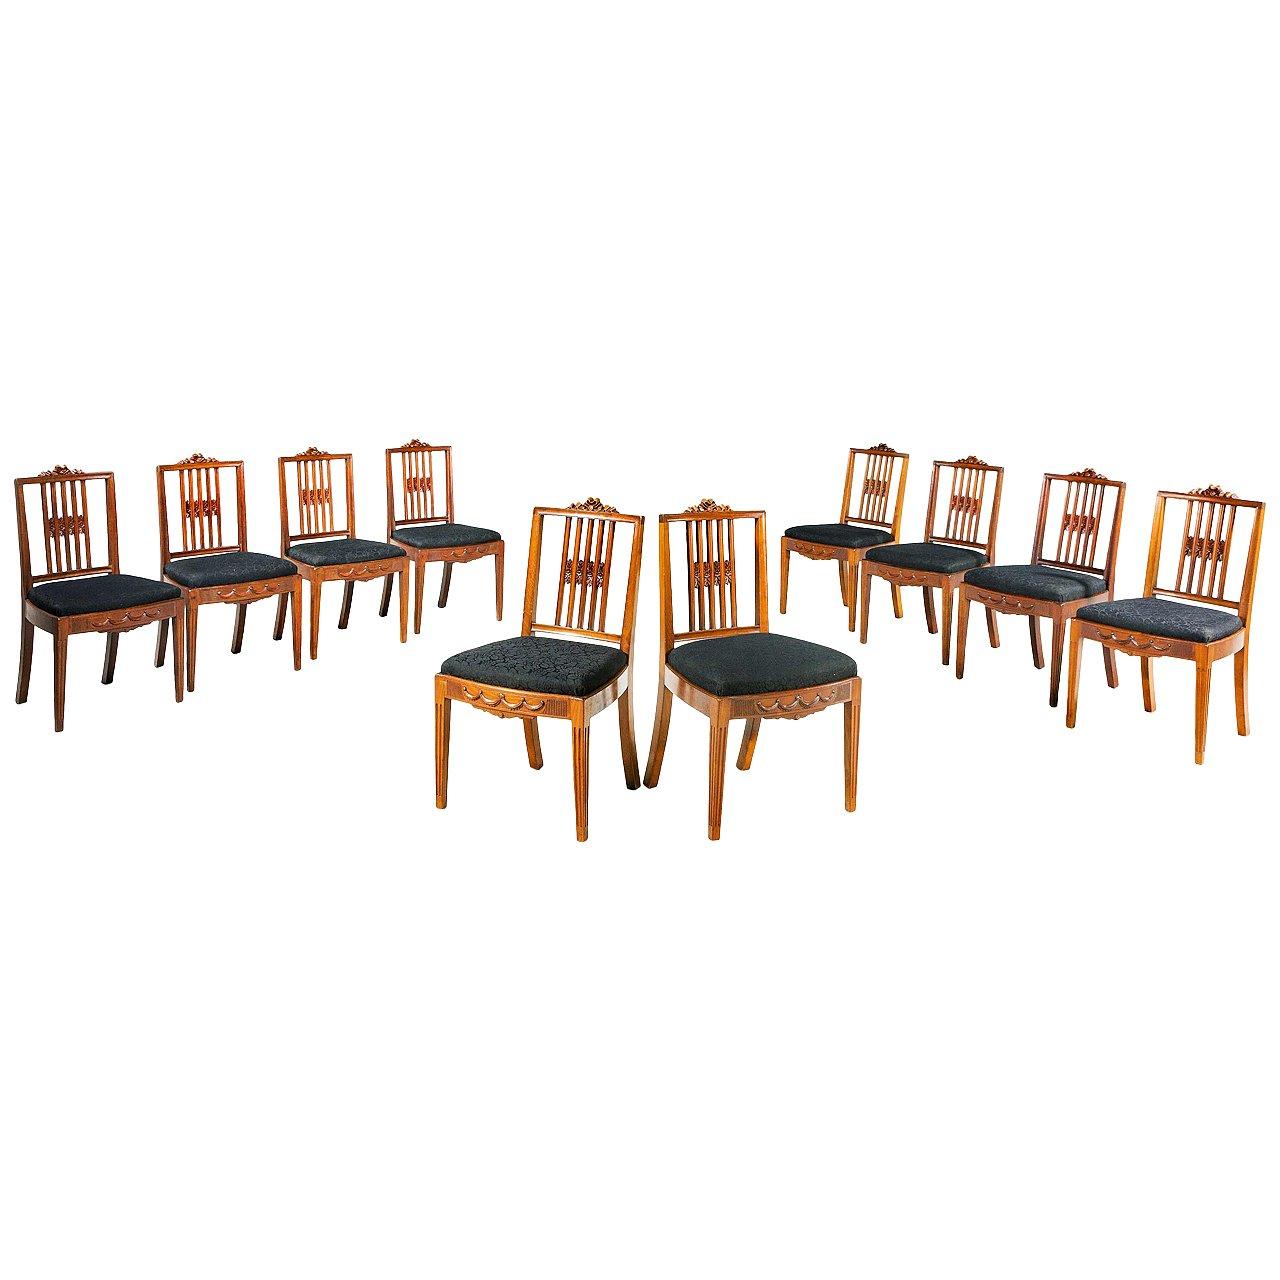 Set of Ten 19th Century Dining Chairs